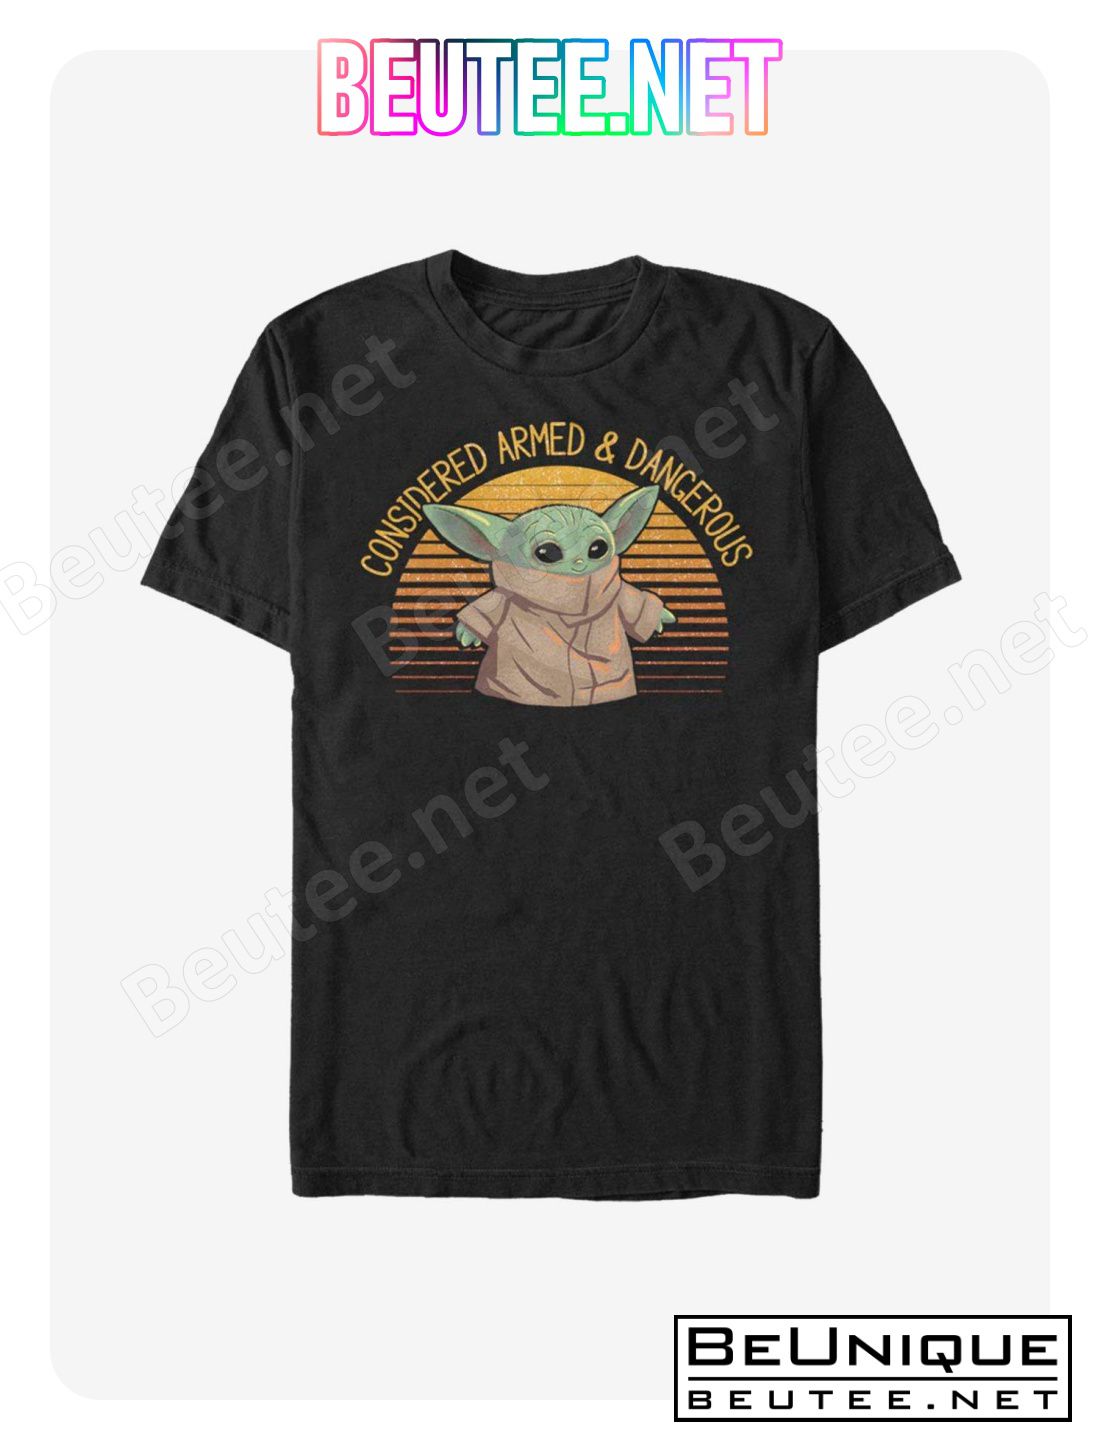 Star Wars The Mandalorian The Child Considered Armed & Dangerous T-Shirt